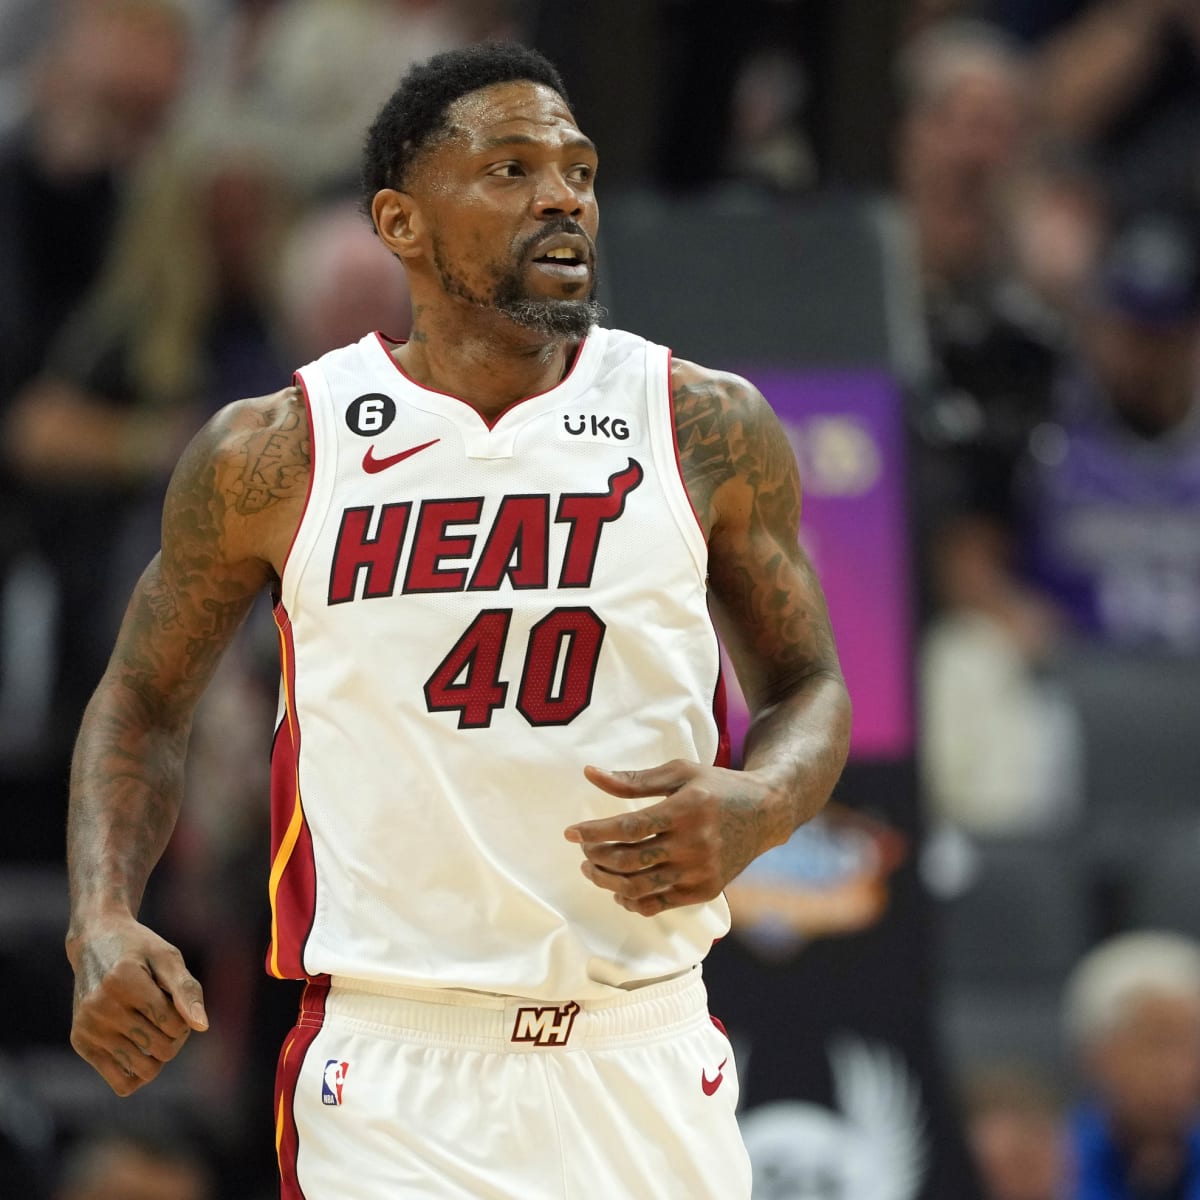 NBA trade news: Udonis Haslem boosts Dwyane Wade to Miami Heat